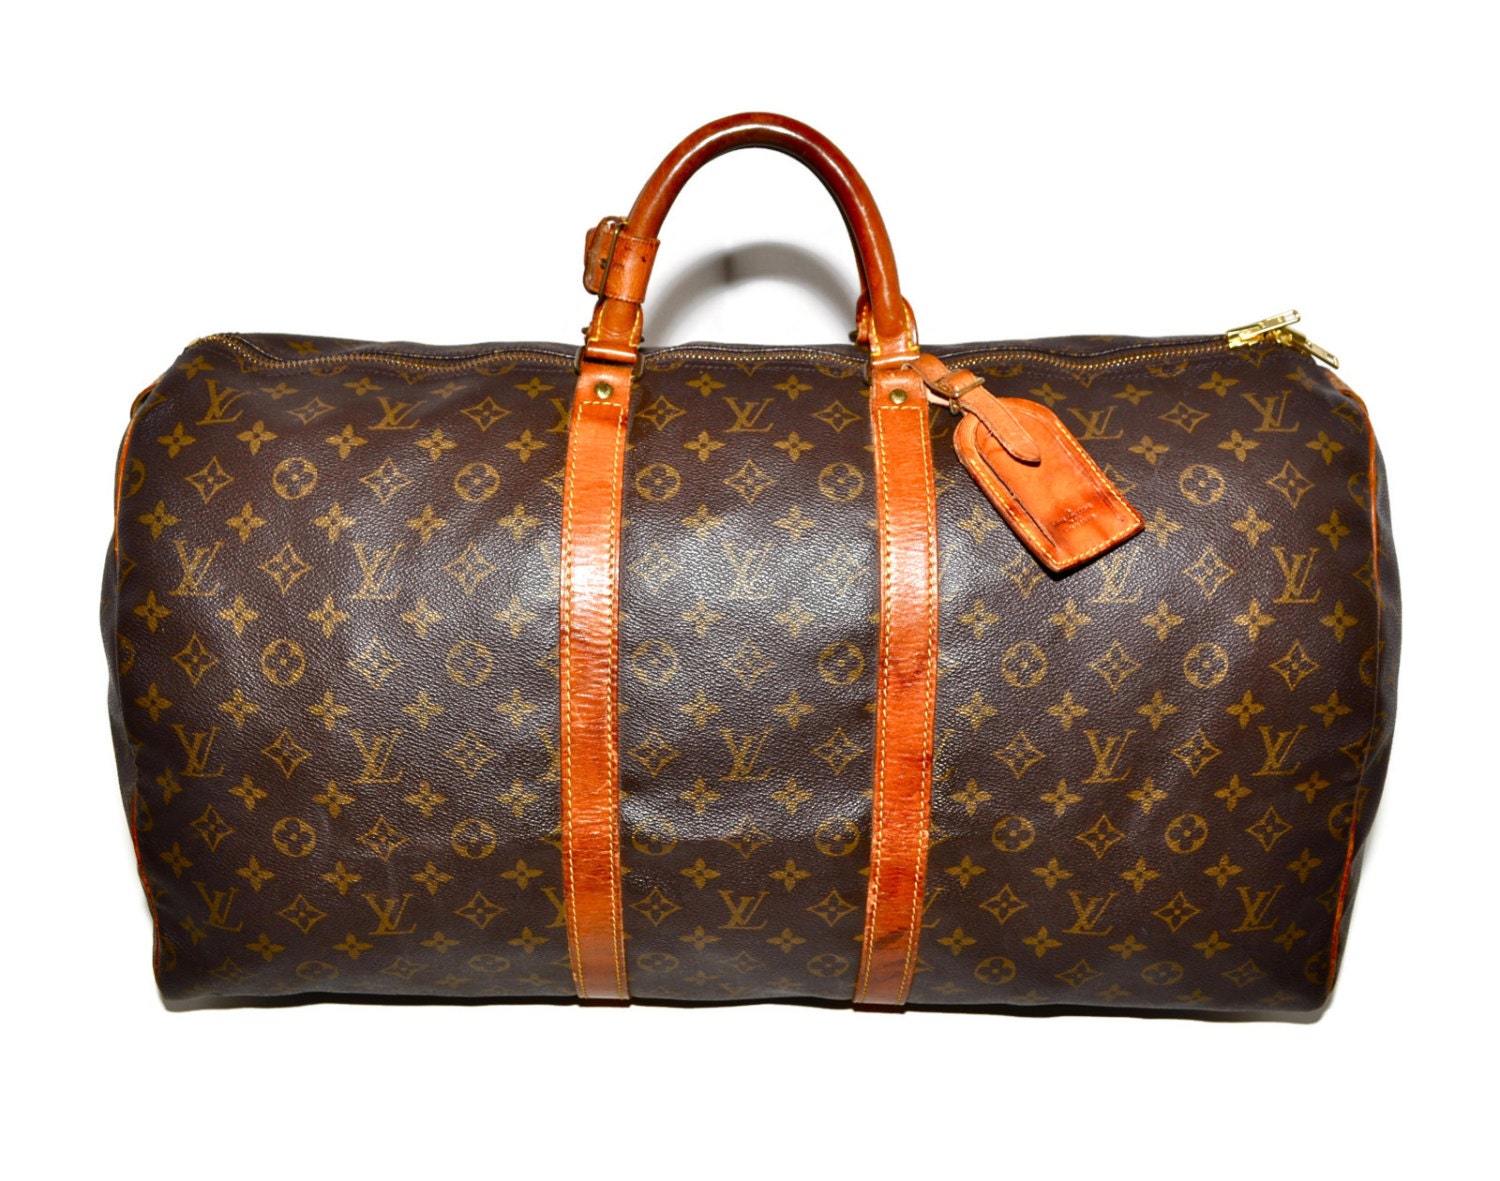 LOUIS VUITTON Keepall 55 Duffle Bag Large Size LV by louise49